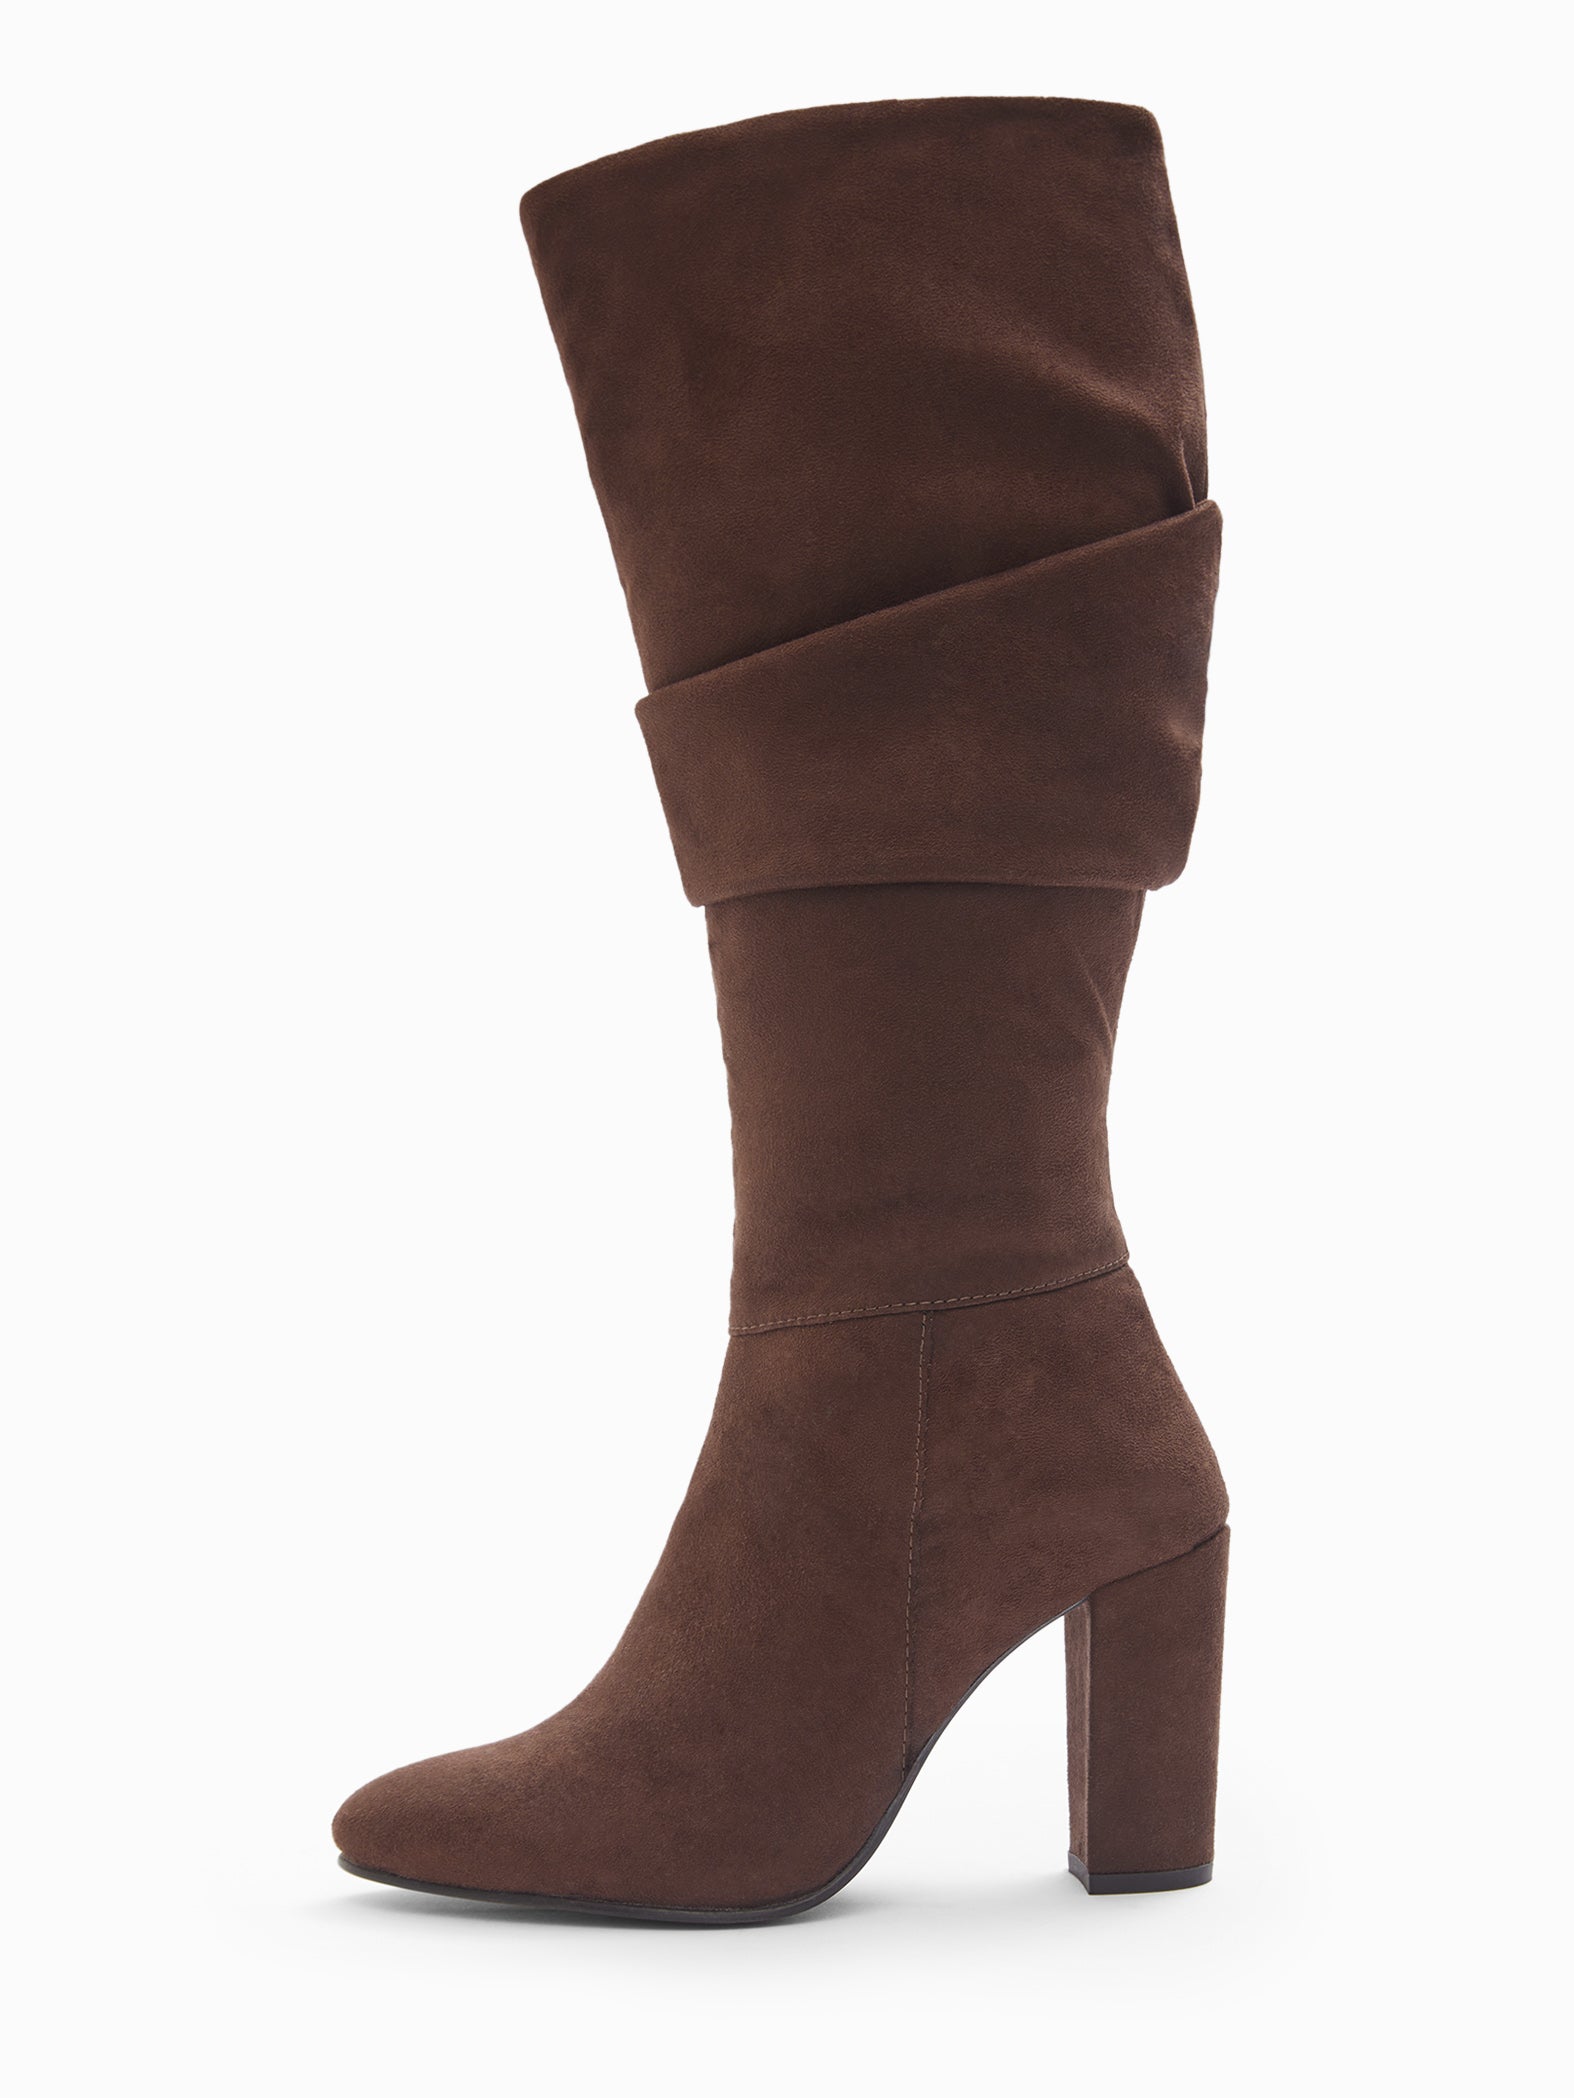 Chocolate Scrunched Boots